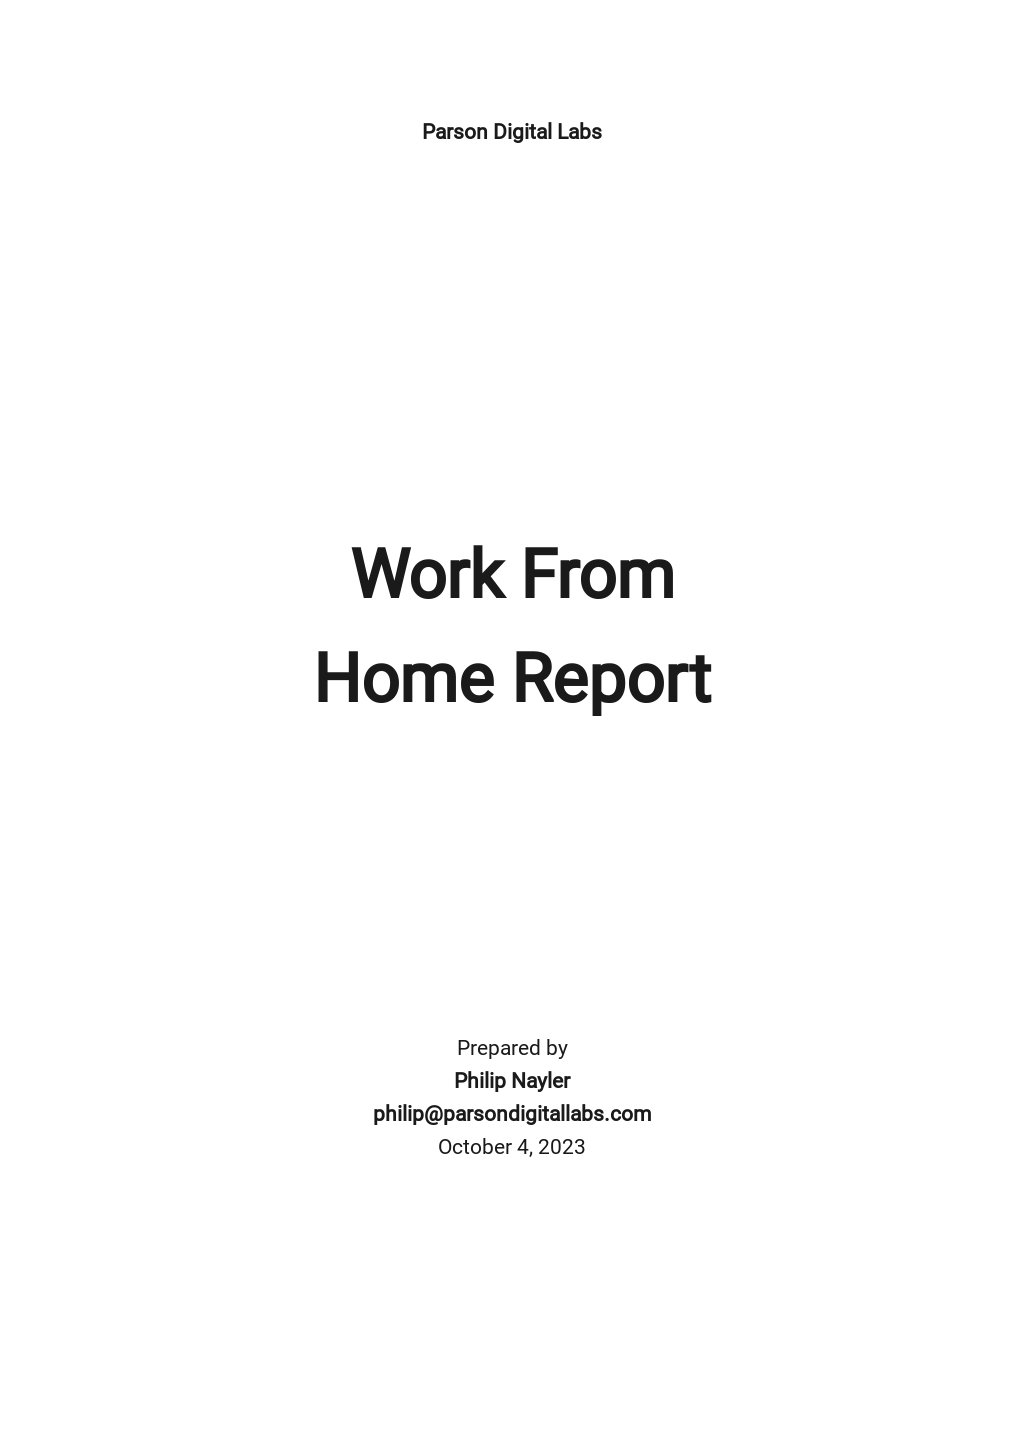 Work From Home Report Template.jpe